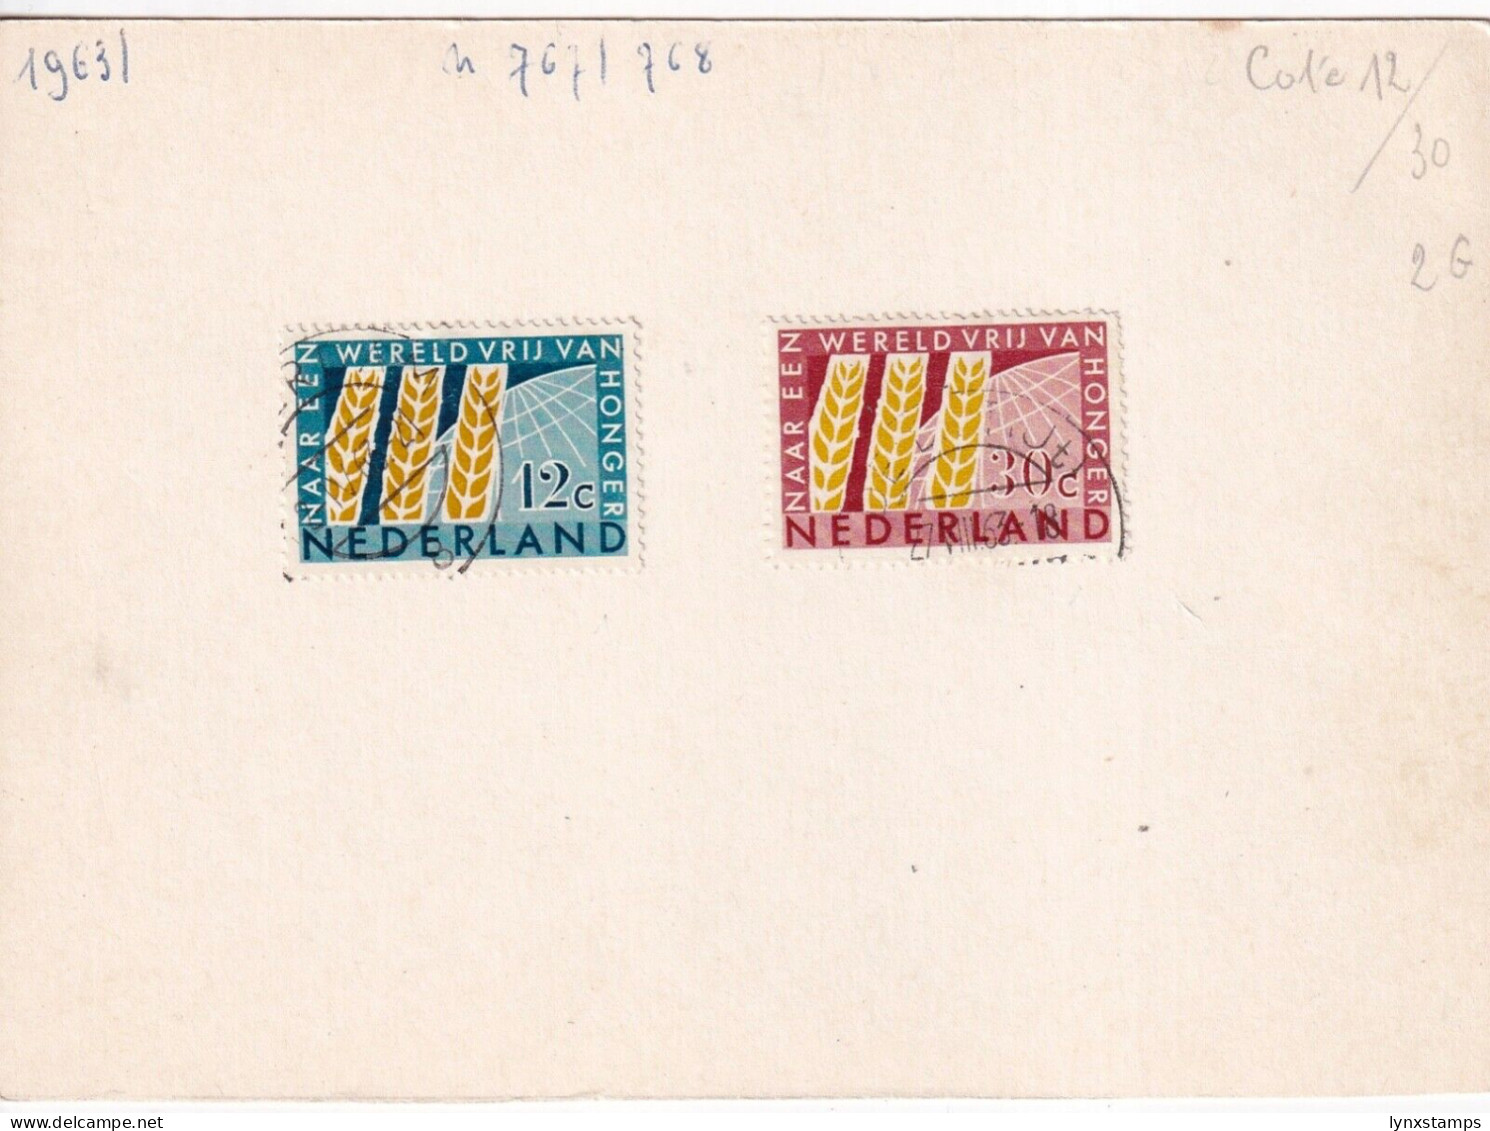 G011 Netherlands Hinged Stamps Selection - Colecciones Completas